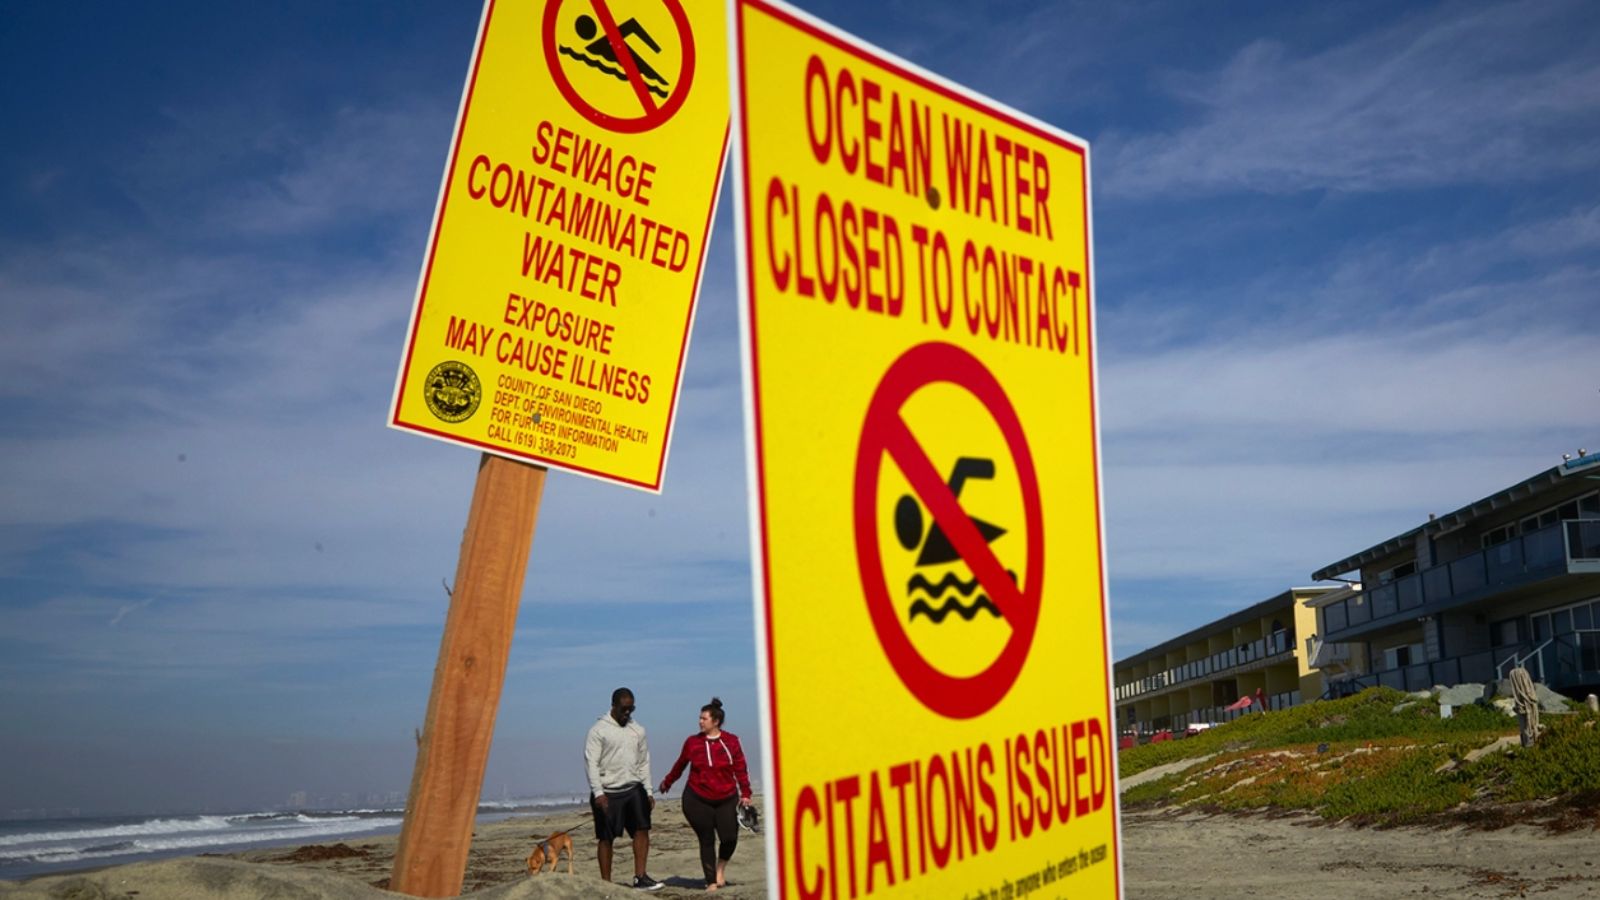 AP Photo/Gregory Bull In this Dec. 12, 2018, file photo, a couple walk along the beach as signs warn of contaminated water at Imperial Beach, Calif.